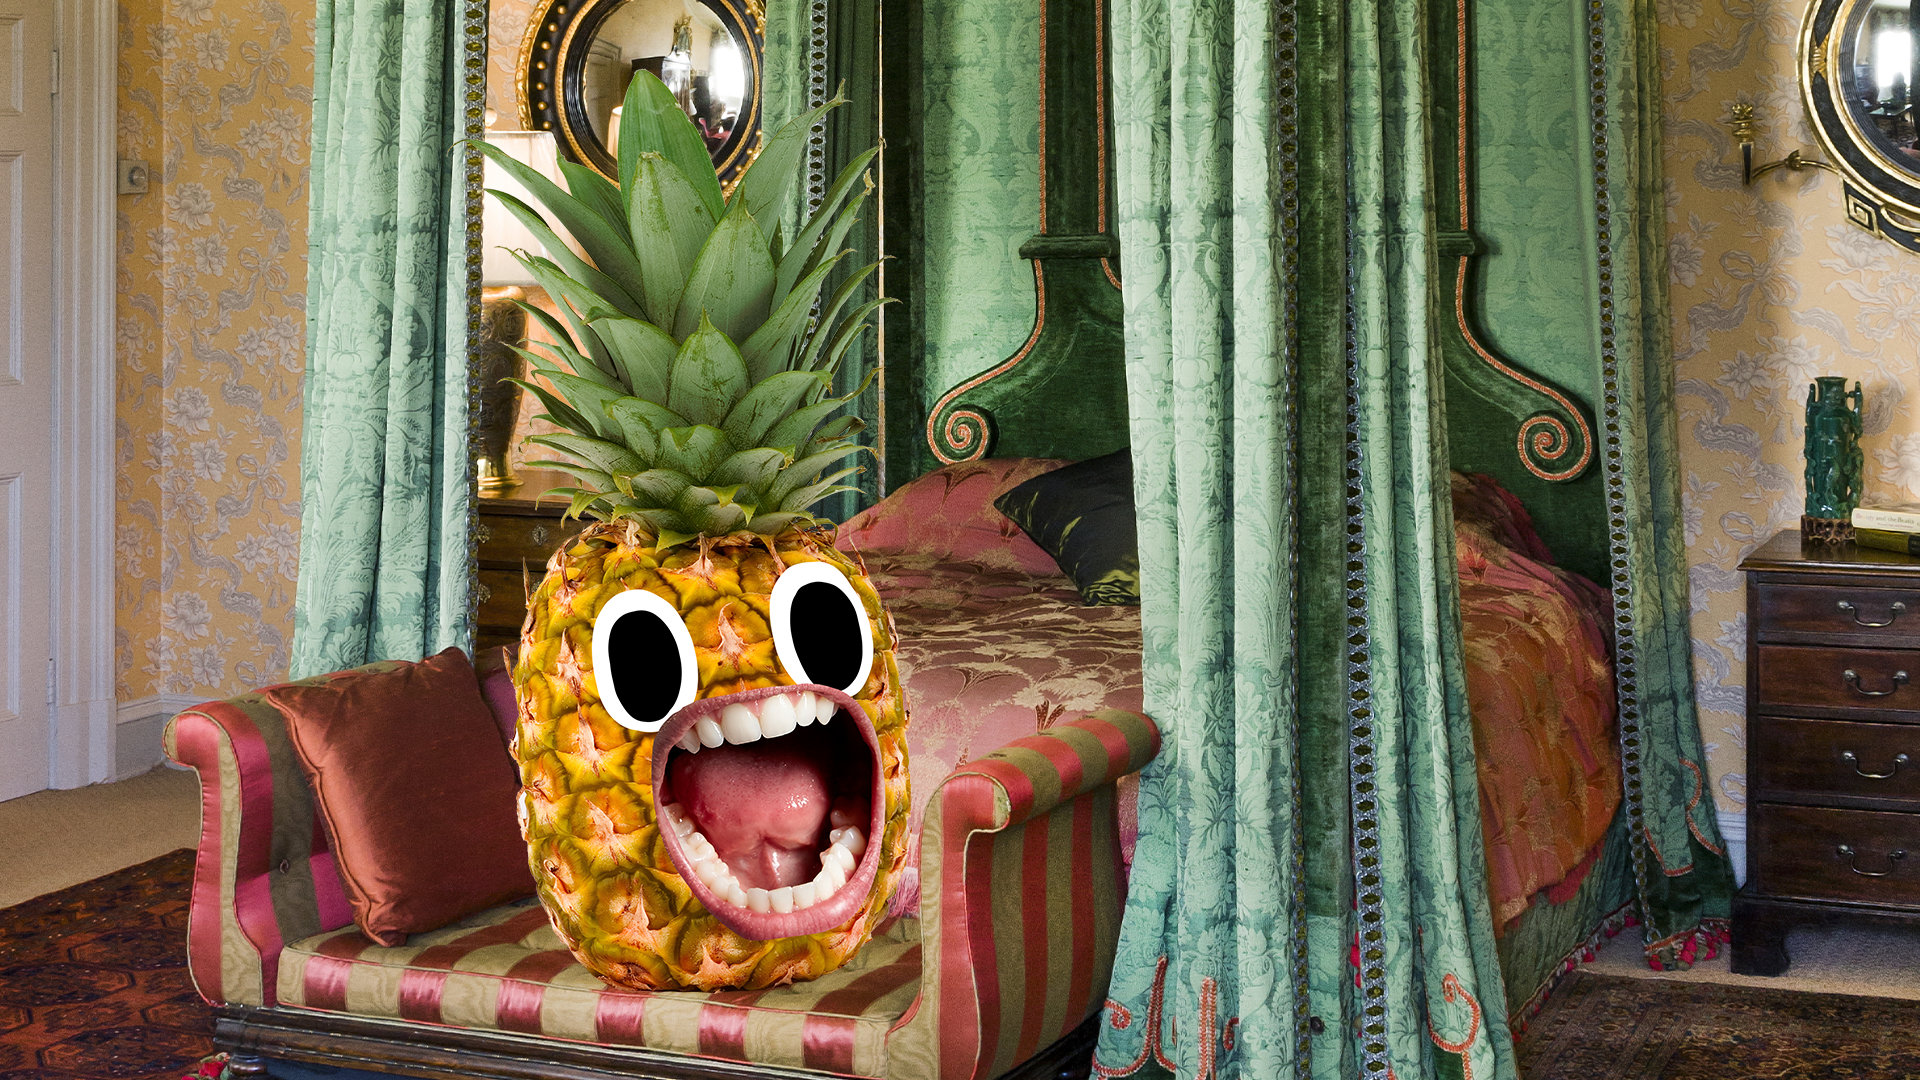 A screaming pineapple in an old fashioned room